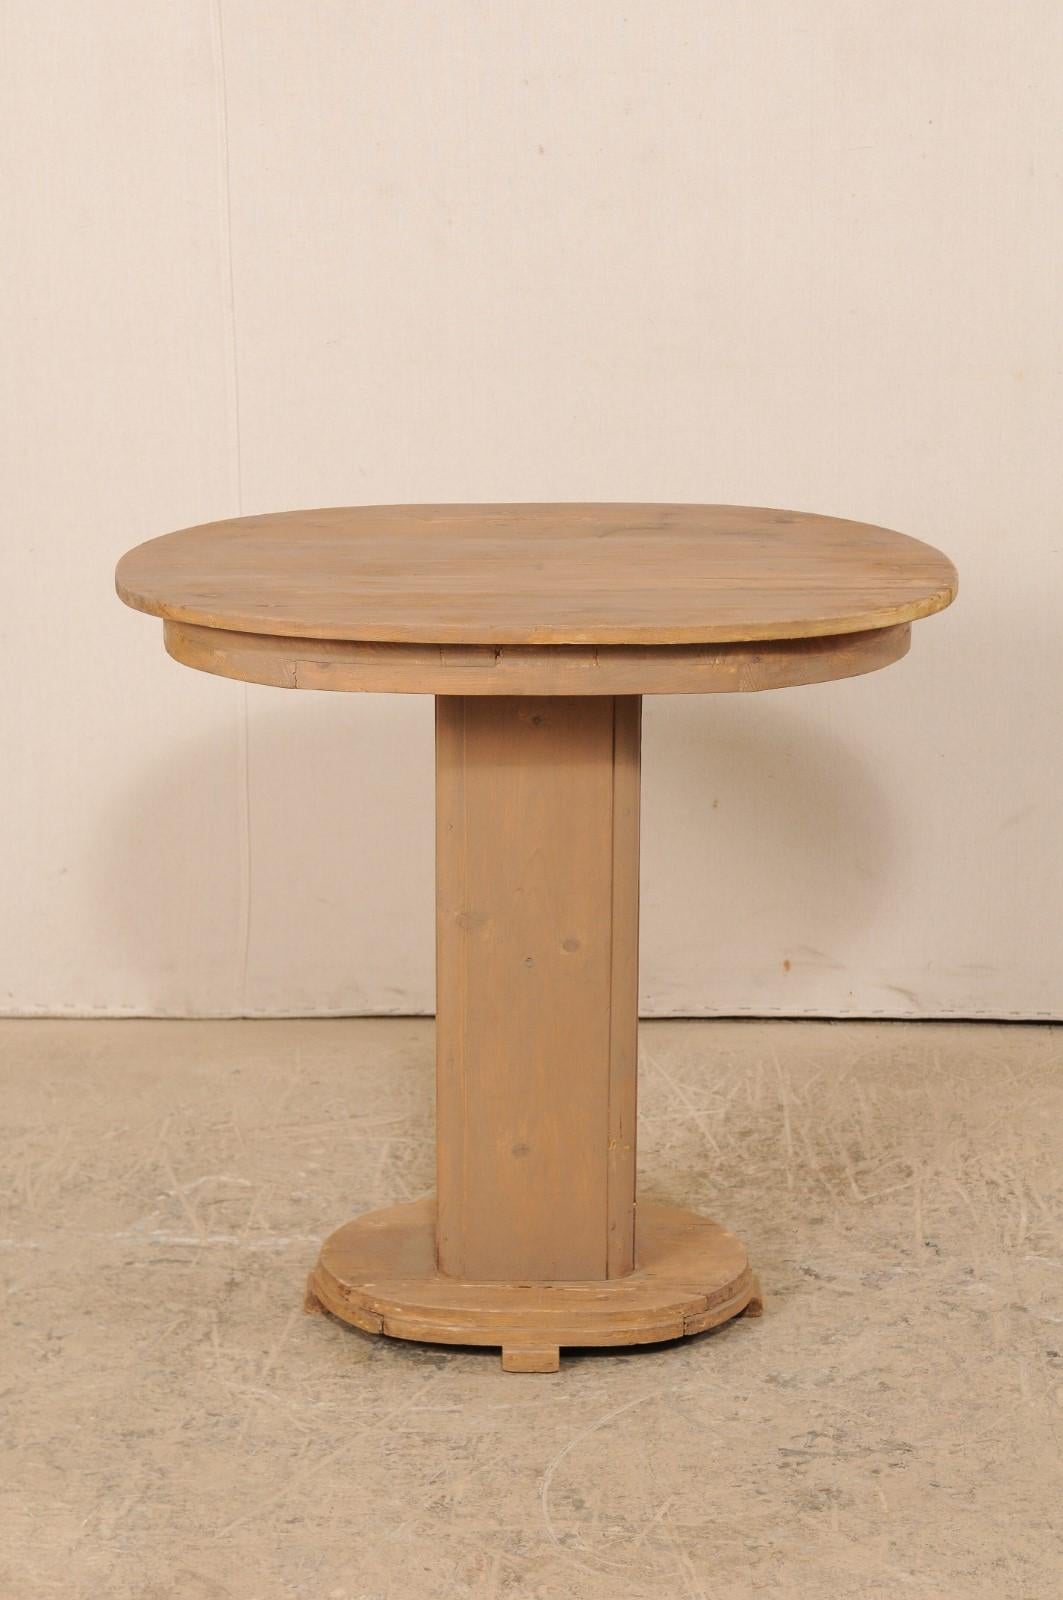 A French painted wood oval-top pedestal table from the mid-20th century. This vintage table from France, features a oval-shaped top with plain skirt, which rests atop a rectangular-shaped column with rounded edges, and a smaller oval-shaped base.